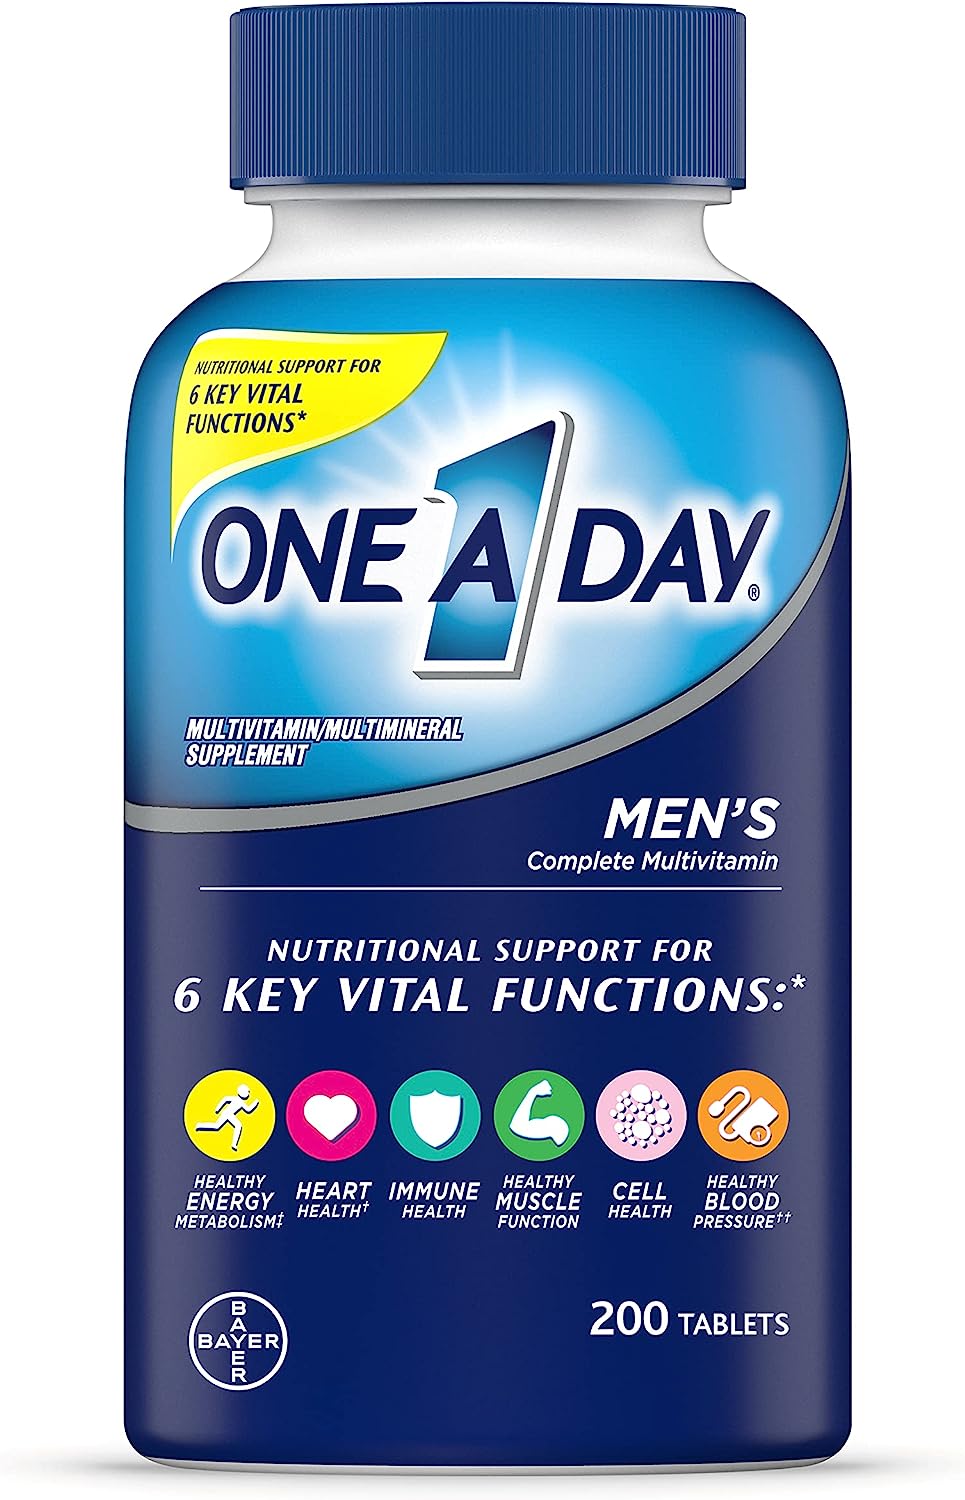 One A Day Men’s Multivitamin, Supplement Tablet with [...]